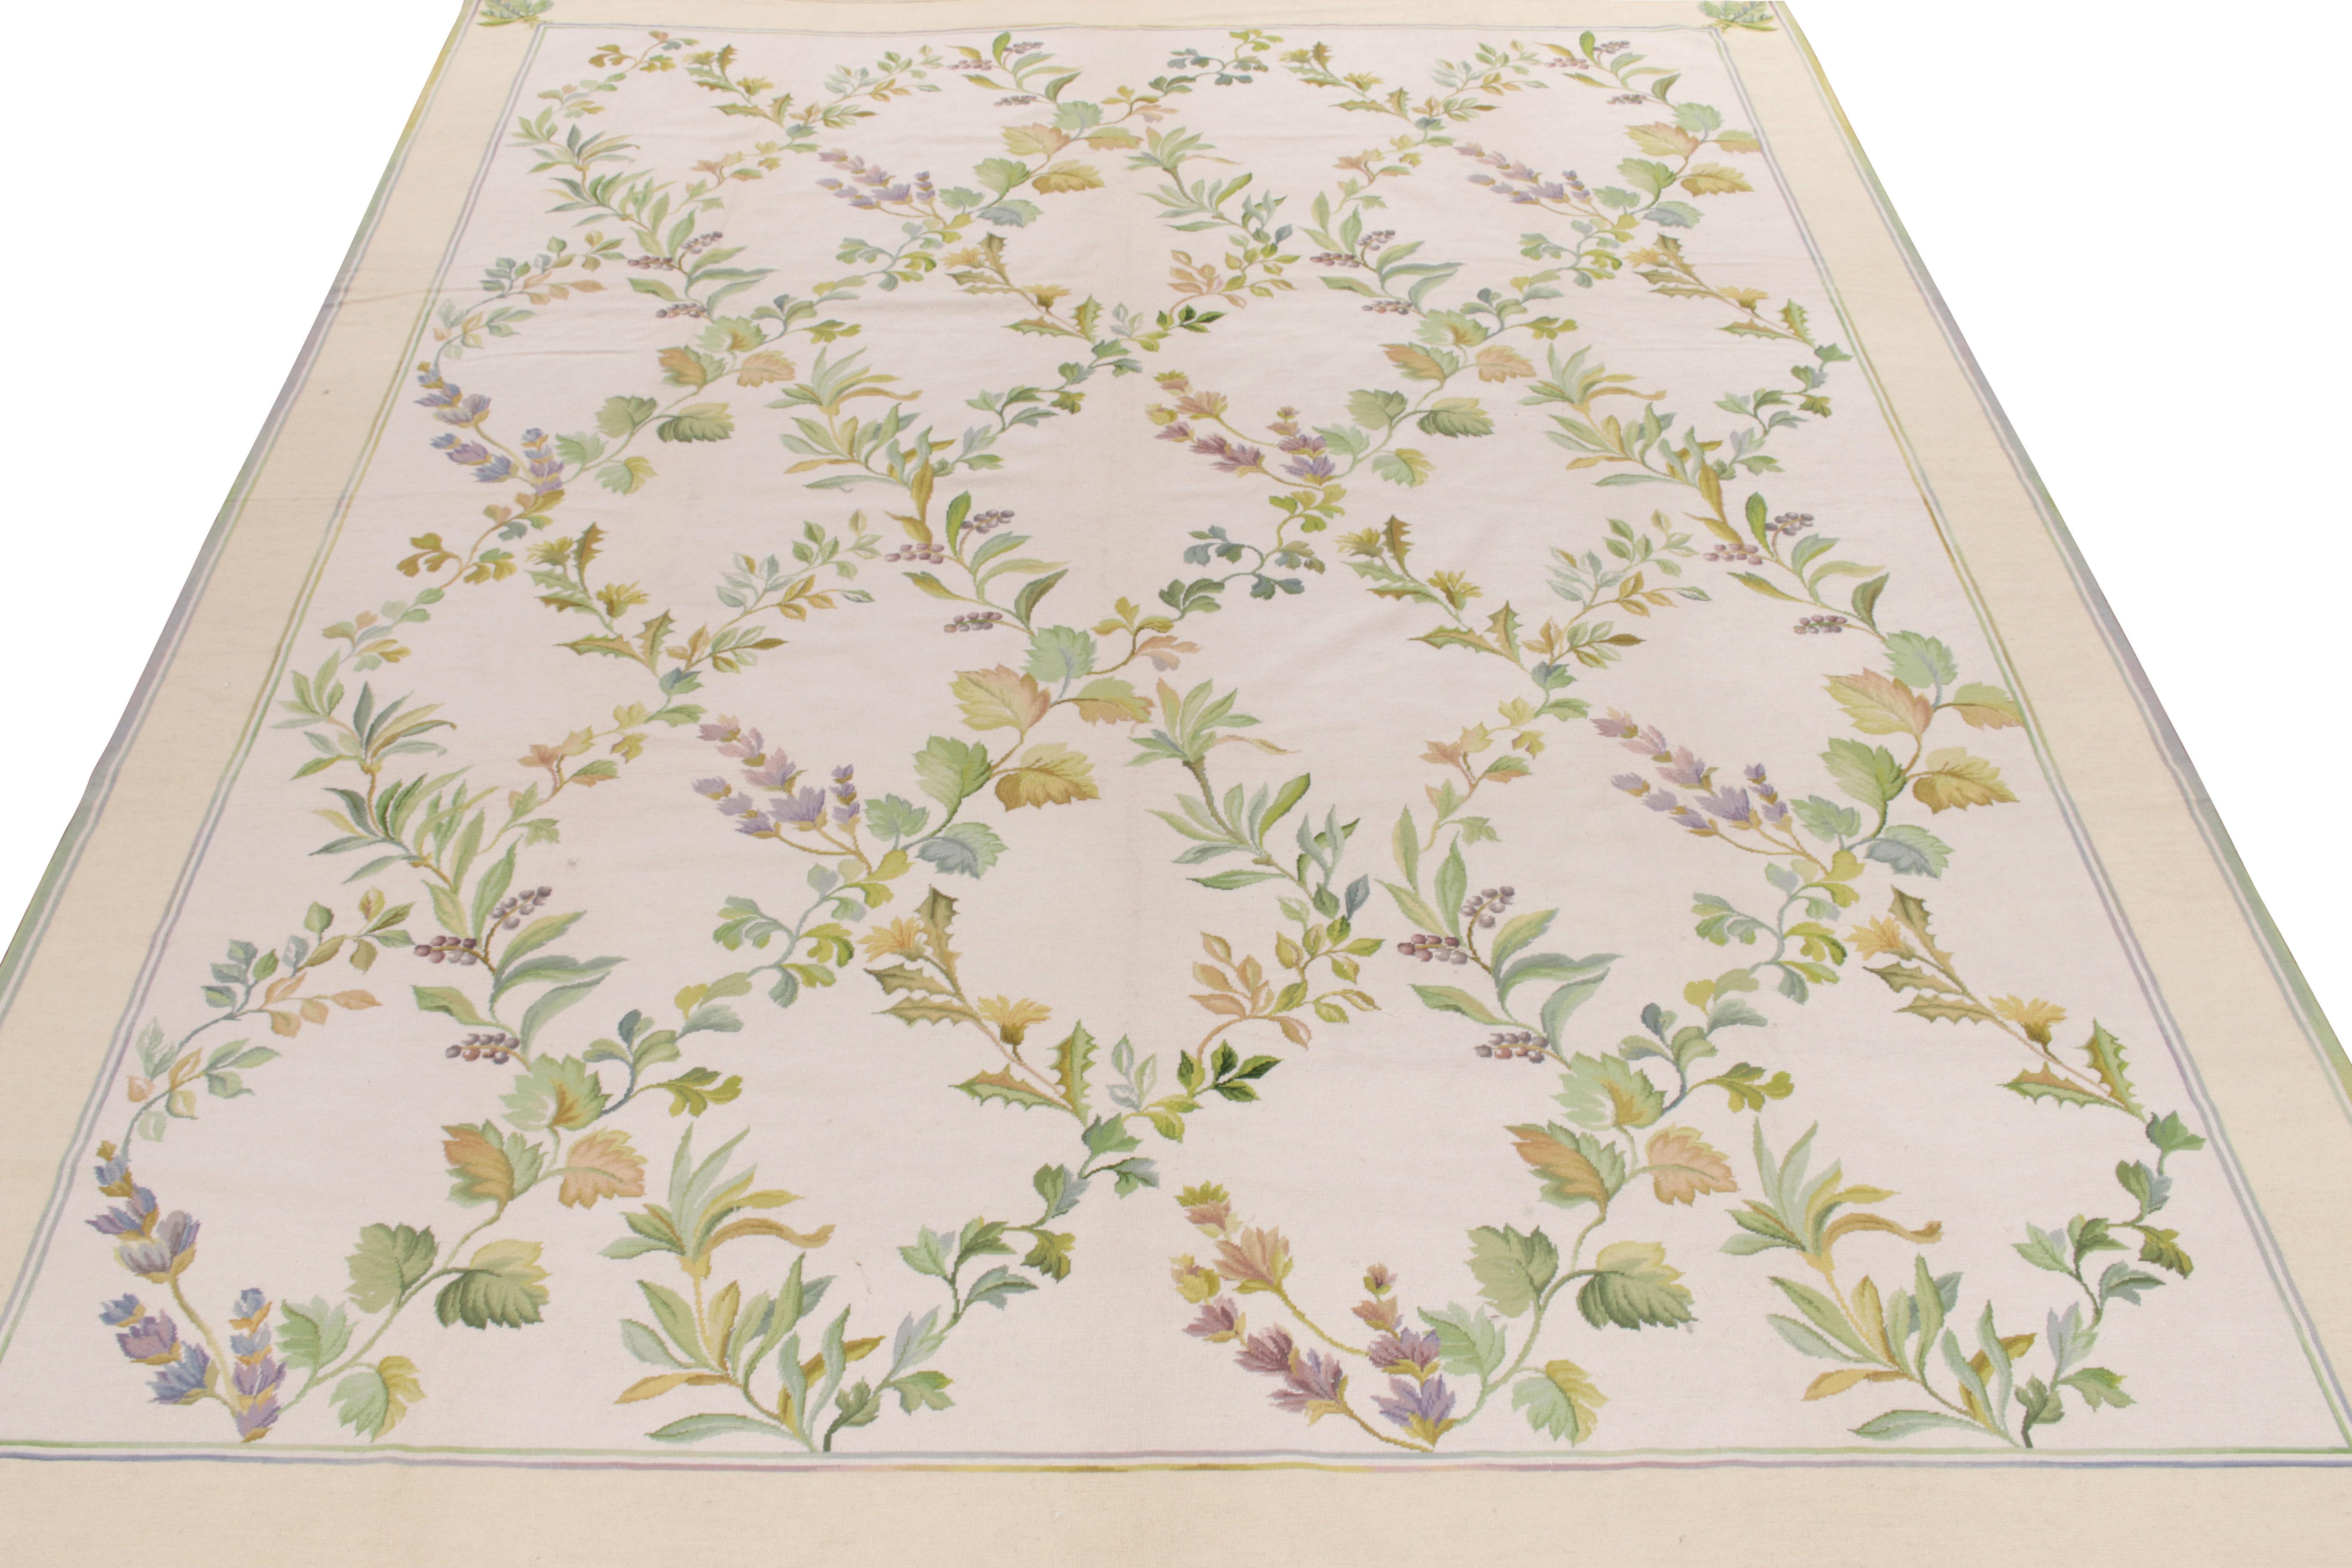 Celebrating the techniques in rug weaving, this 9x12 contemporary scale is an ode to the coveted needlepoint style where alluring florals embrace the scale in green, golden and lilac hues on a soft backdrop for a more transitional take in this